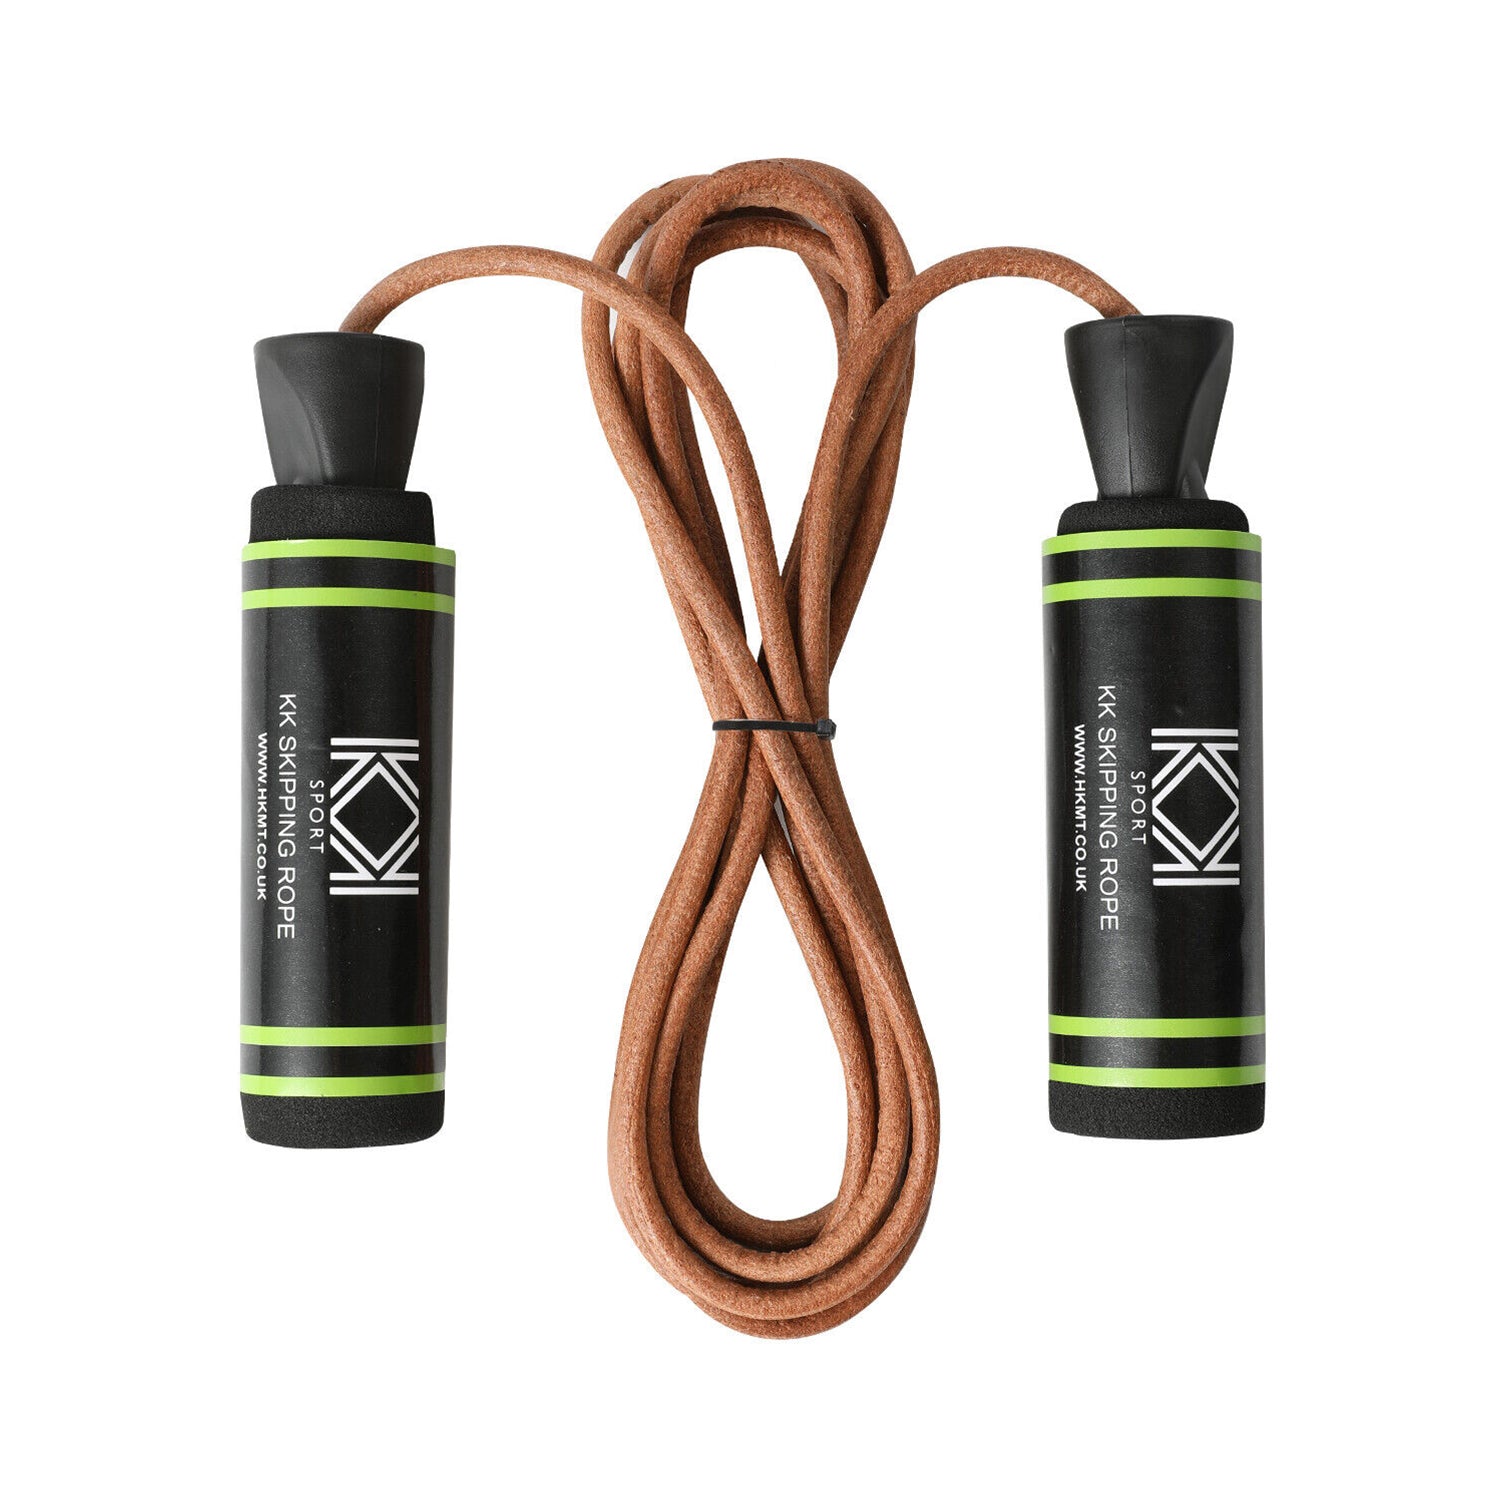 Skipping rope - Leather cable